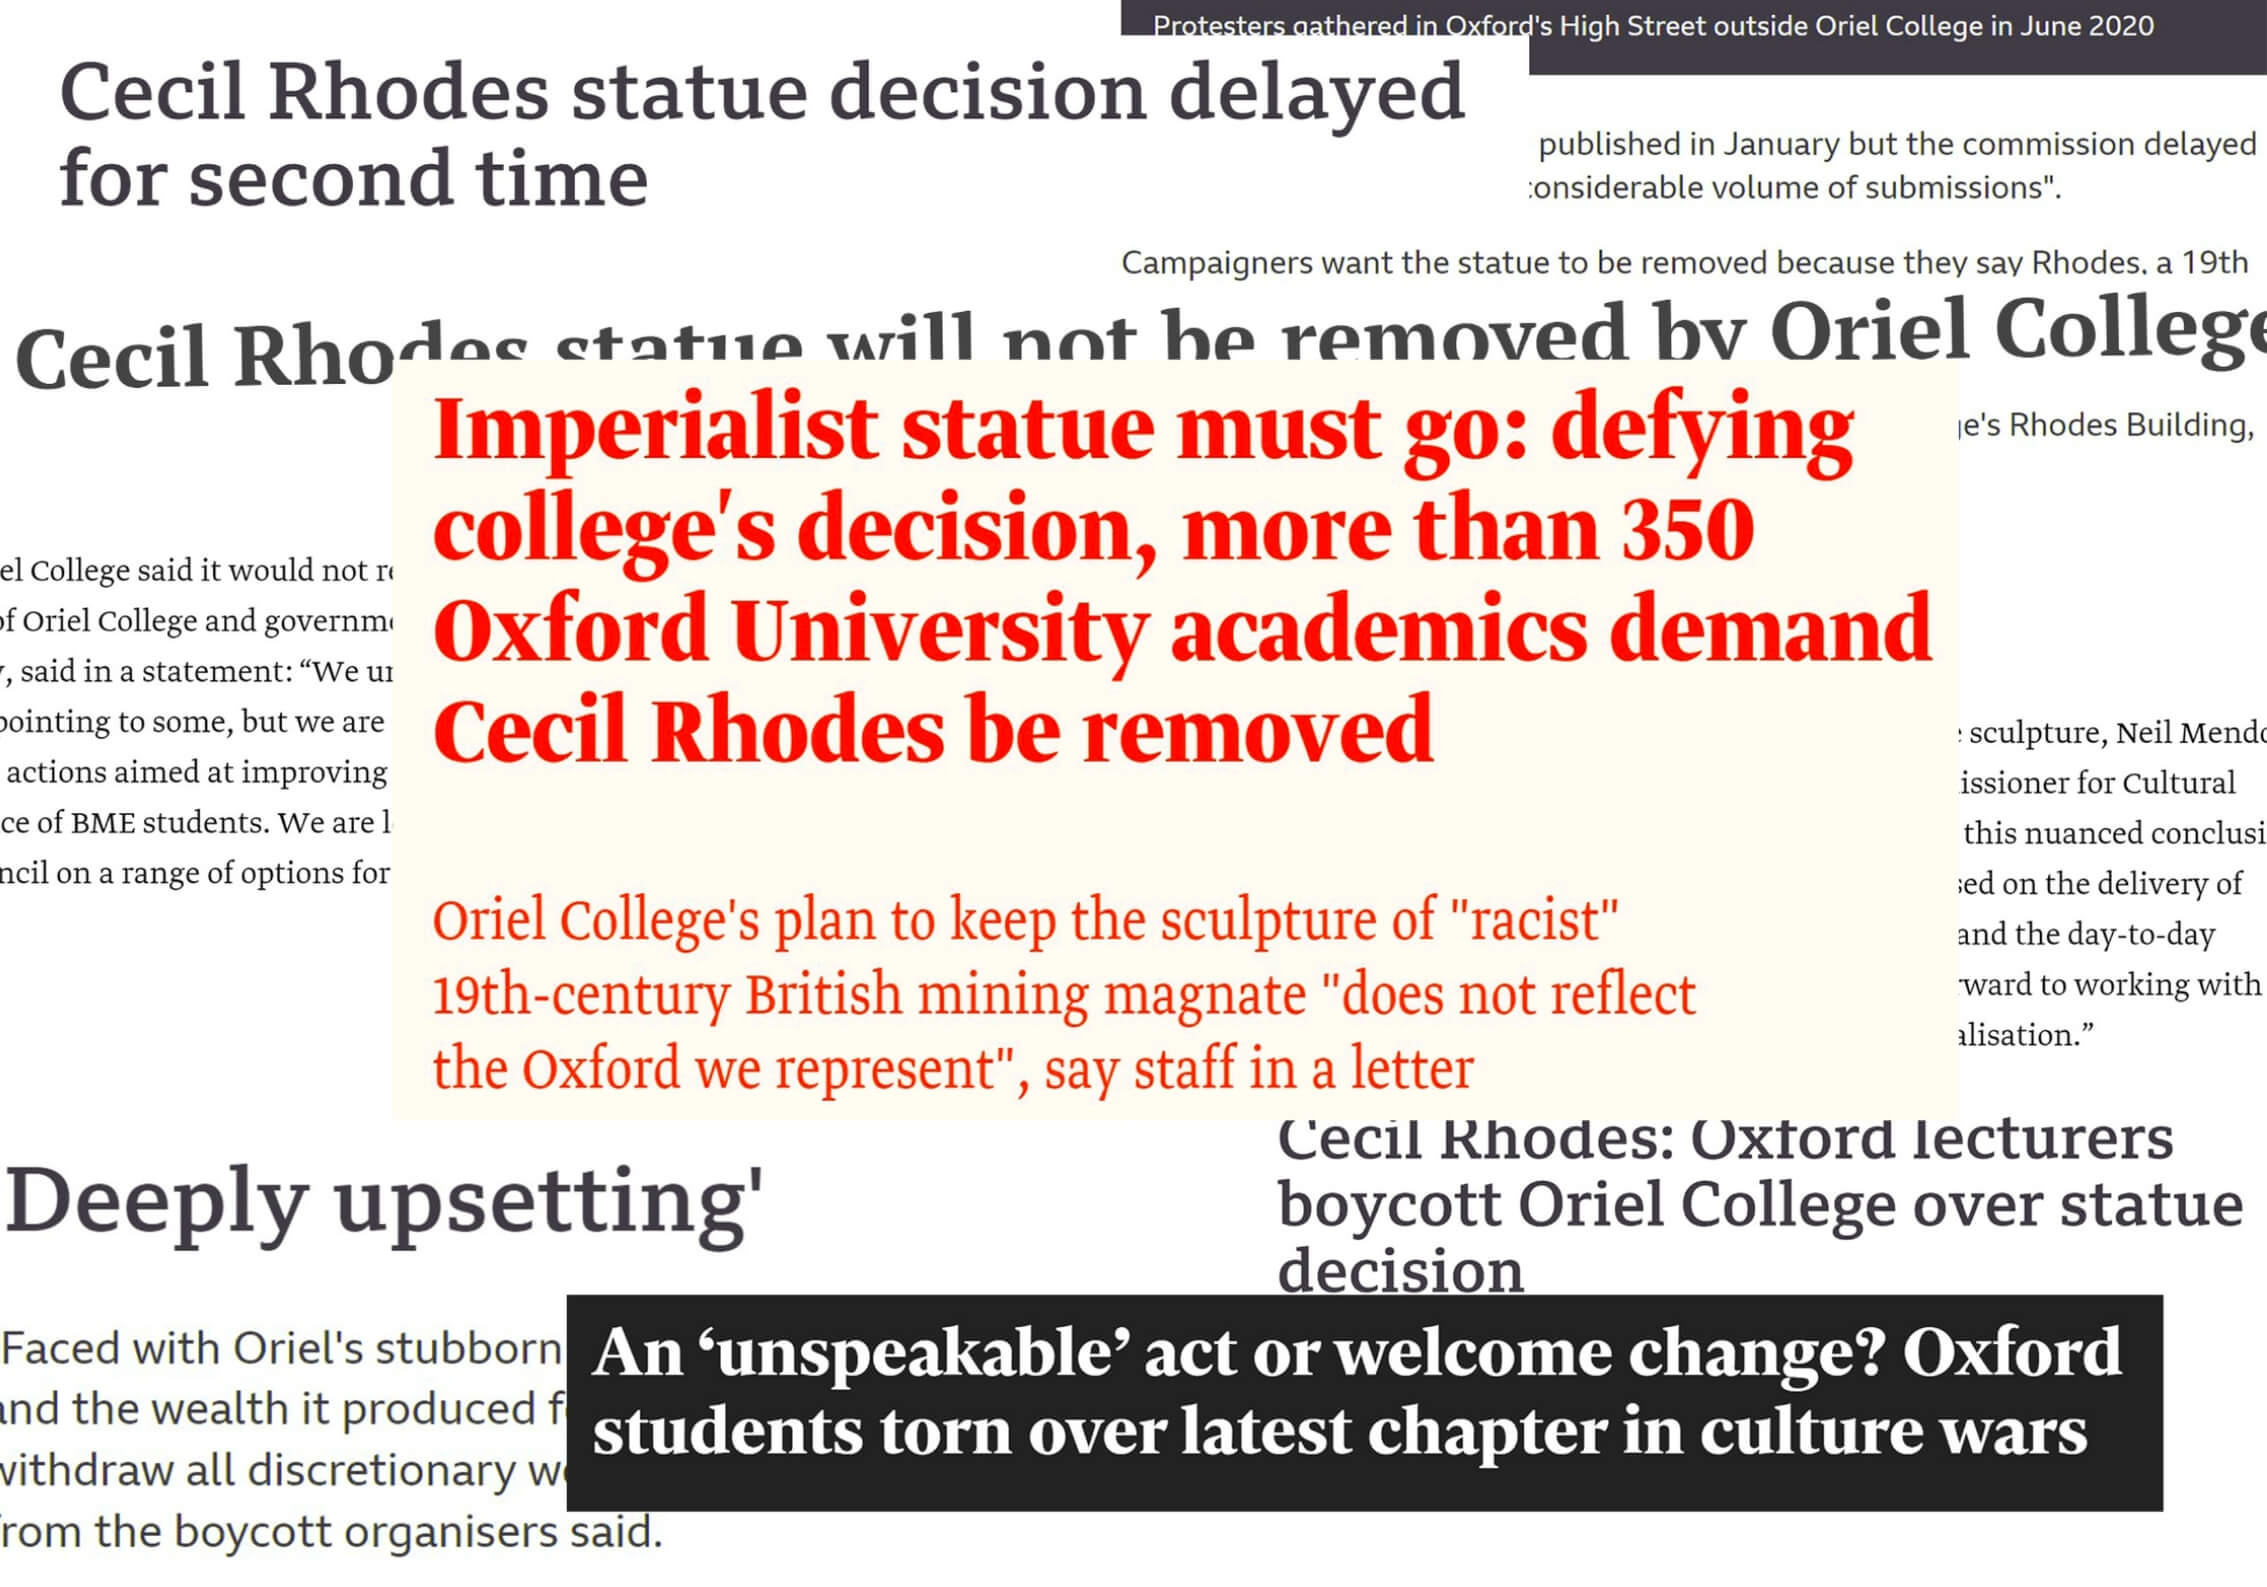 A collection of headlines about the Cecil Rhodes statue controversy at Oriel College in Oxford.